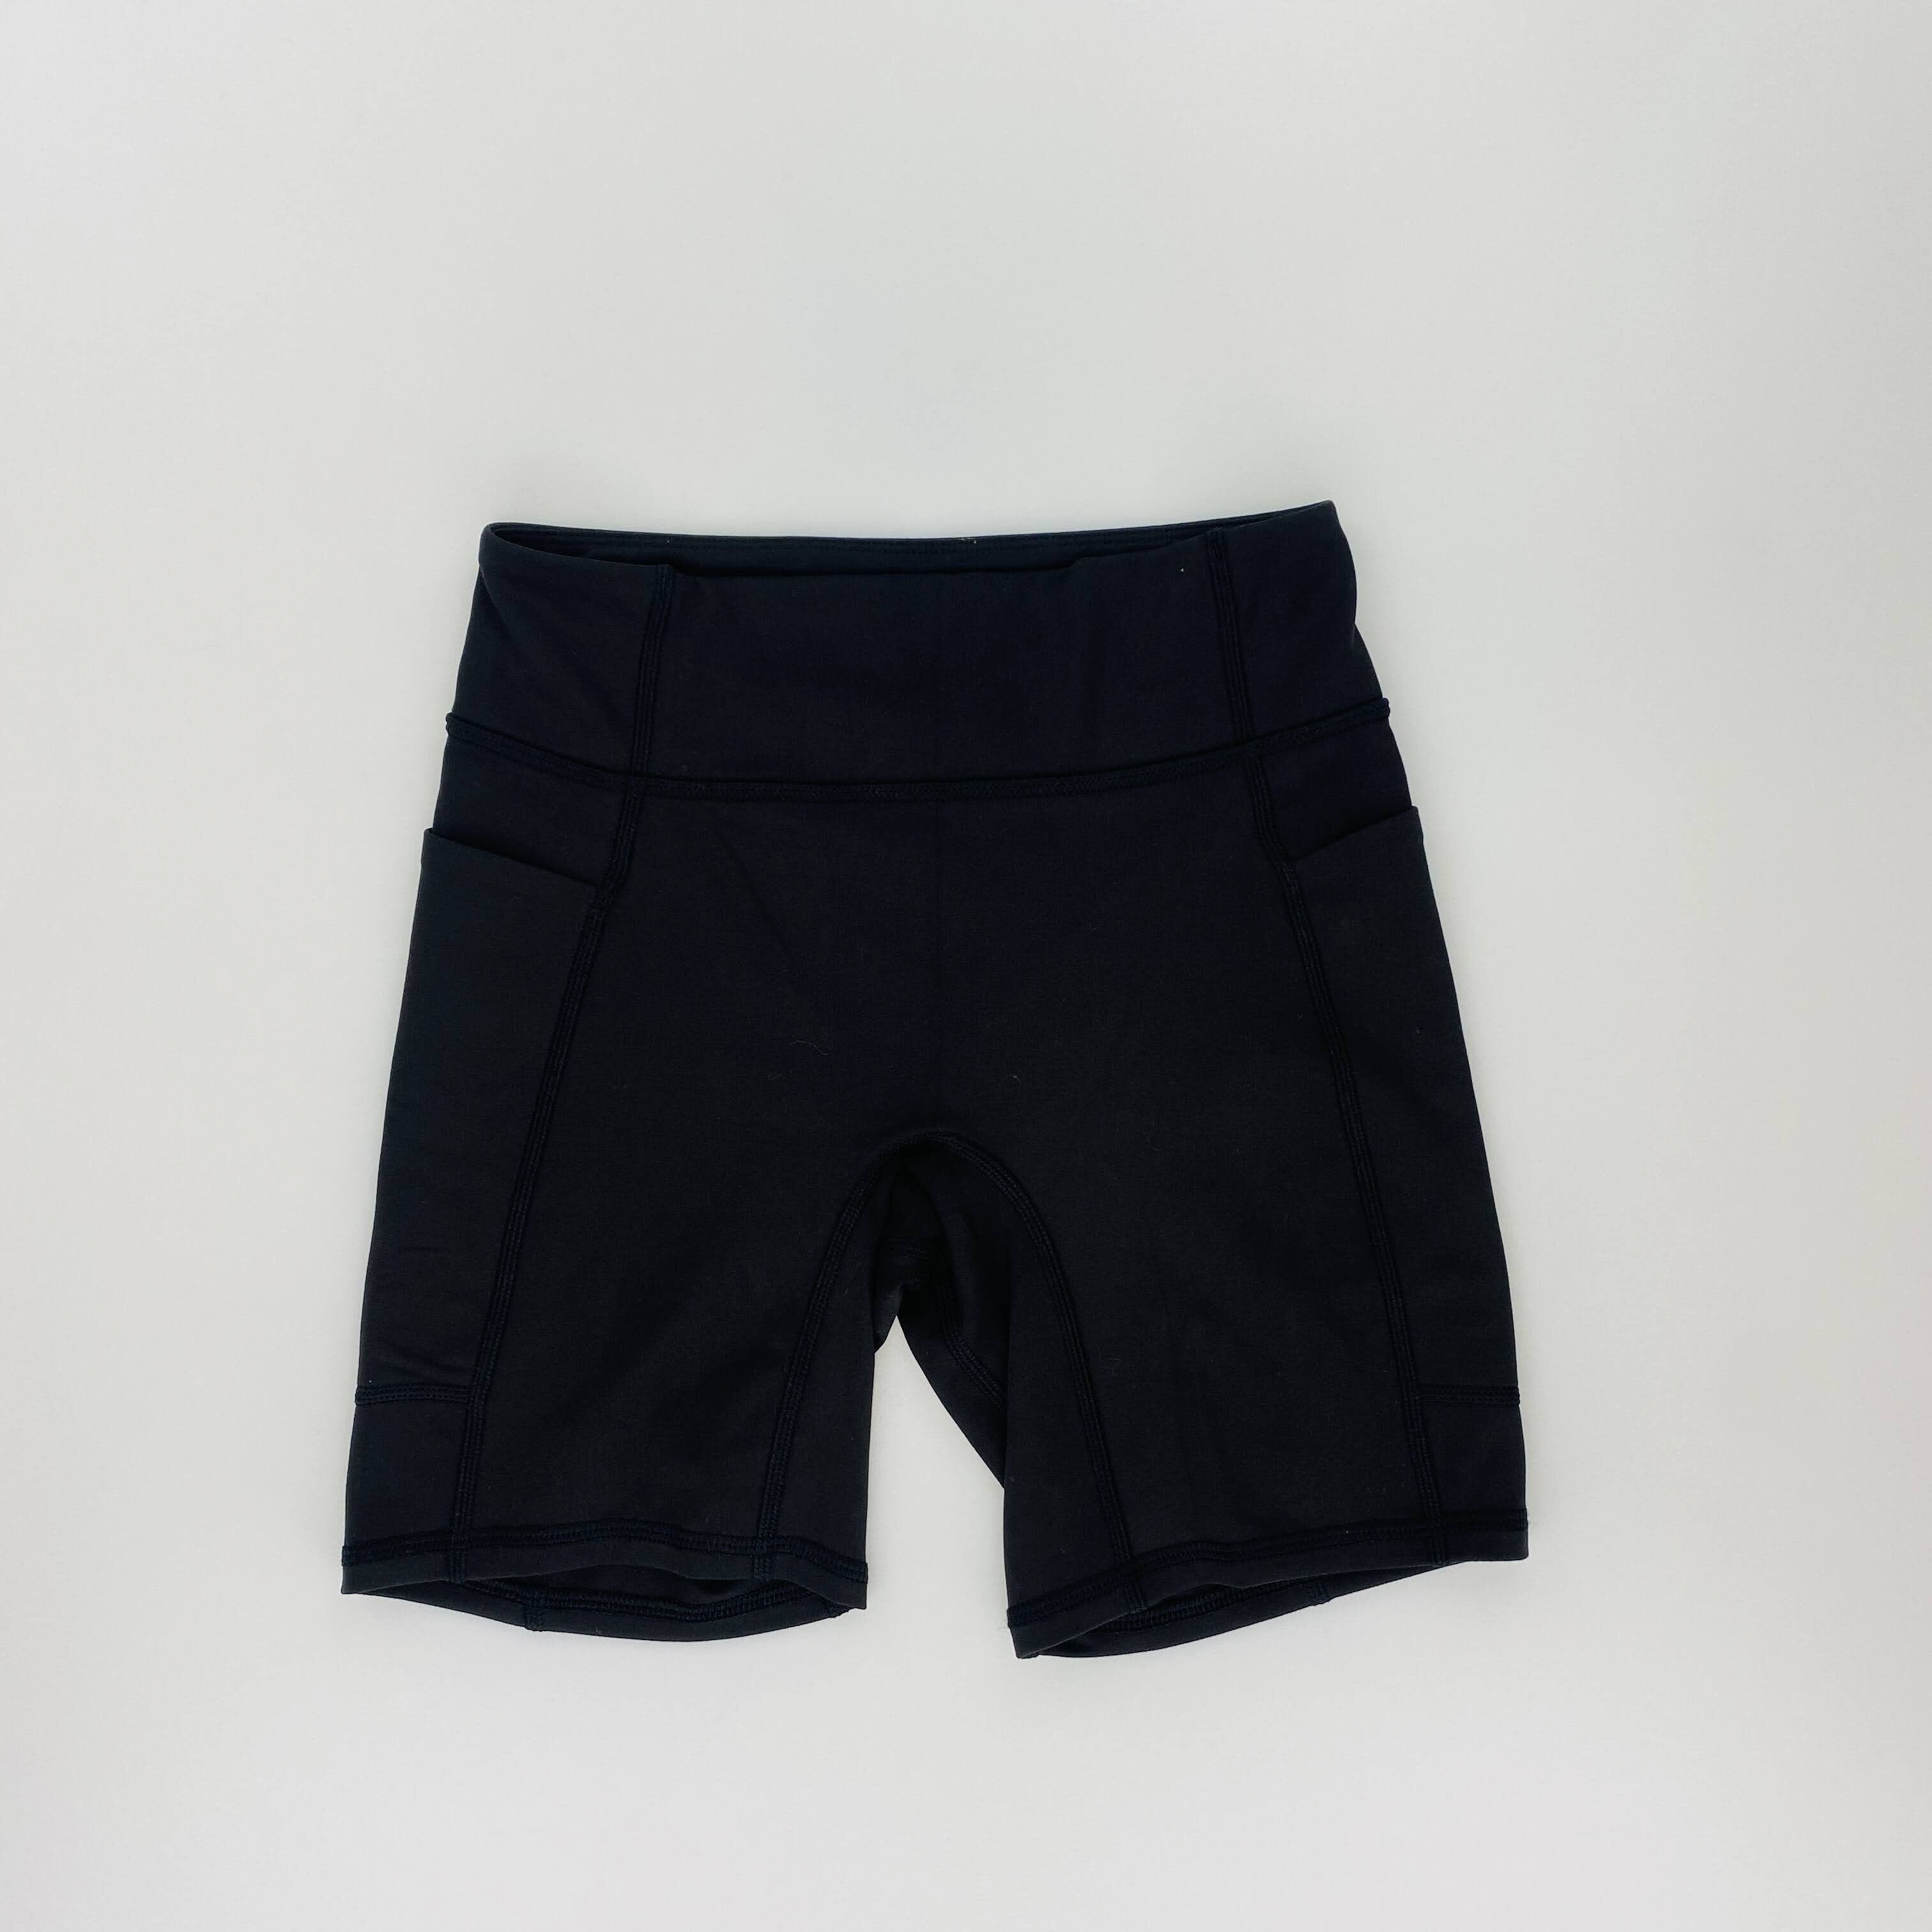 Patagonia K's Maipo Shorts - 6 in. - Second Hand Shorts - Kid's - Black - 10- 12 years old | Hardloop